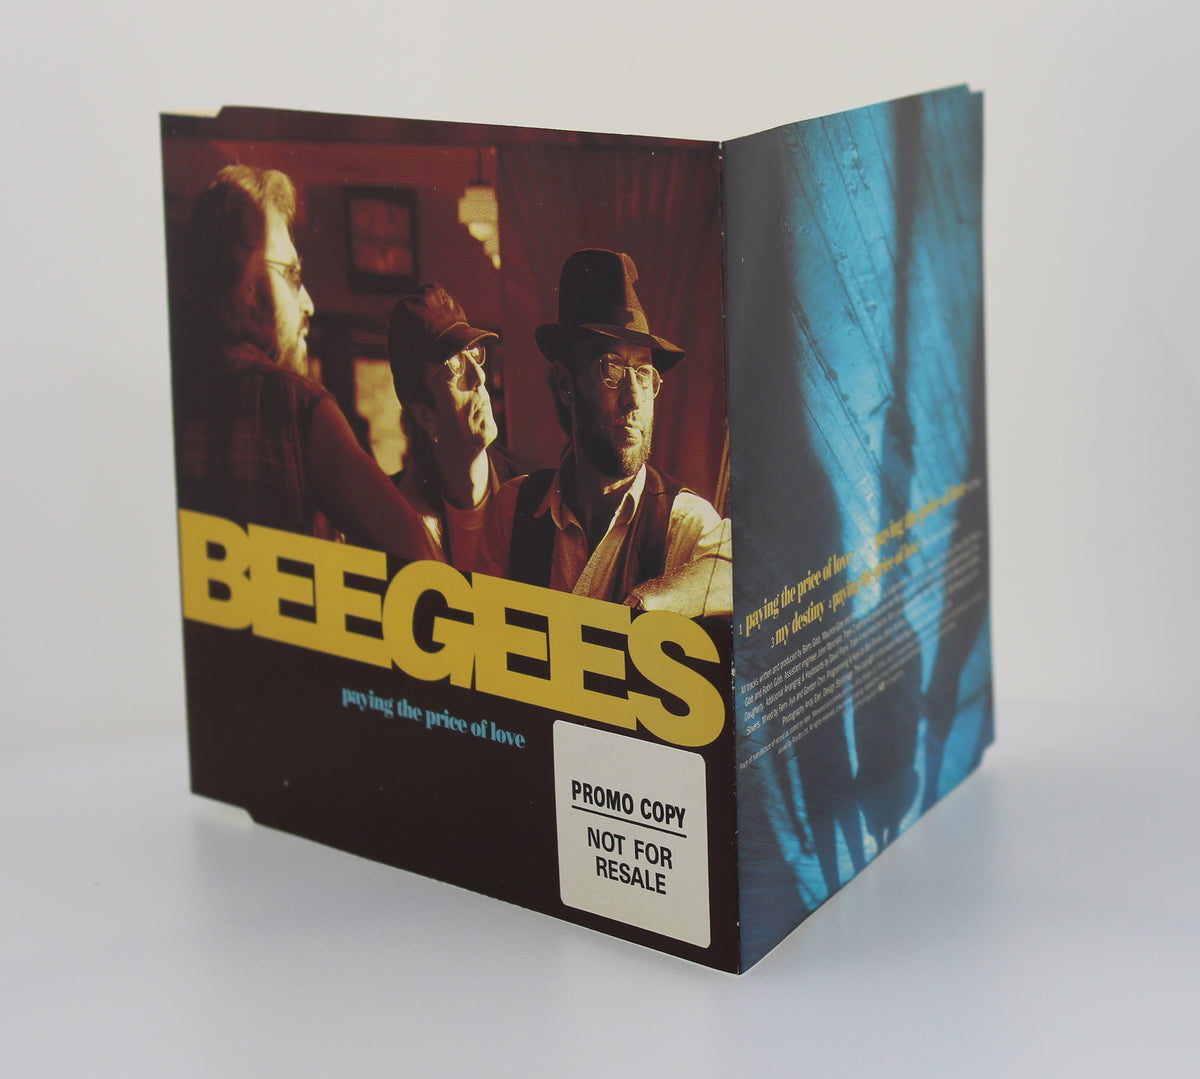 Bee Gees – Paying The Price Of Love, CD, Maxi-Single Promo, UK/Europe 1993